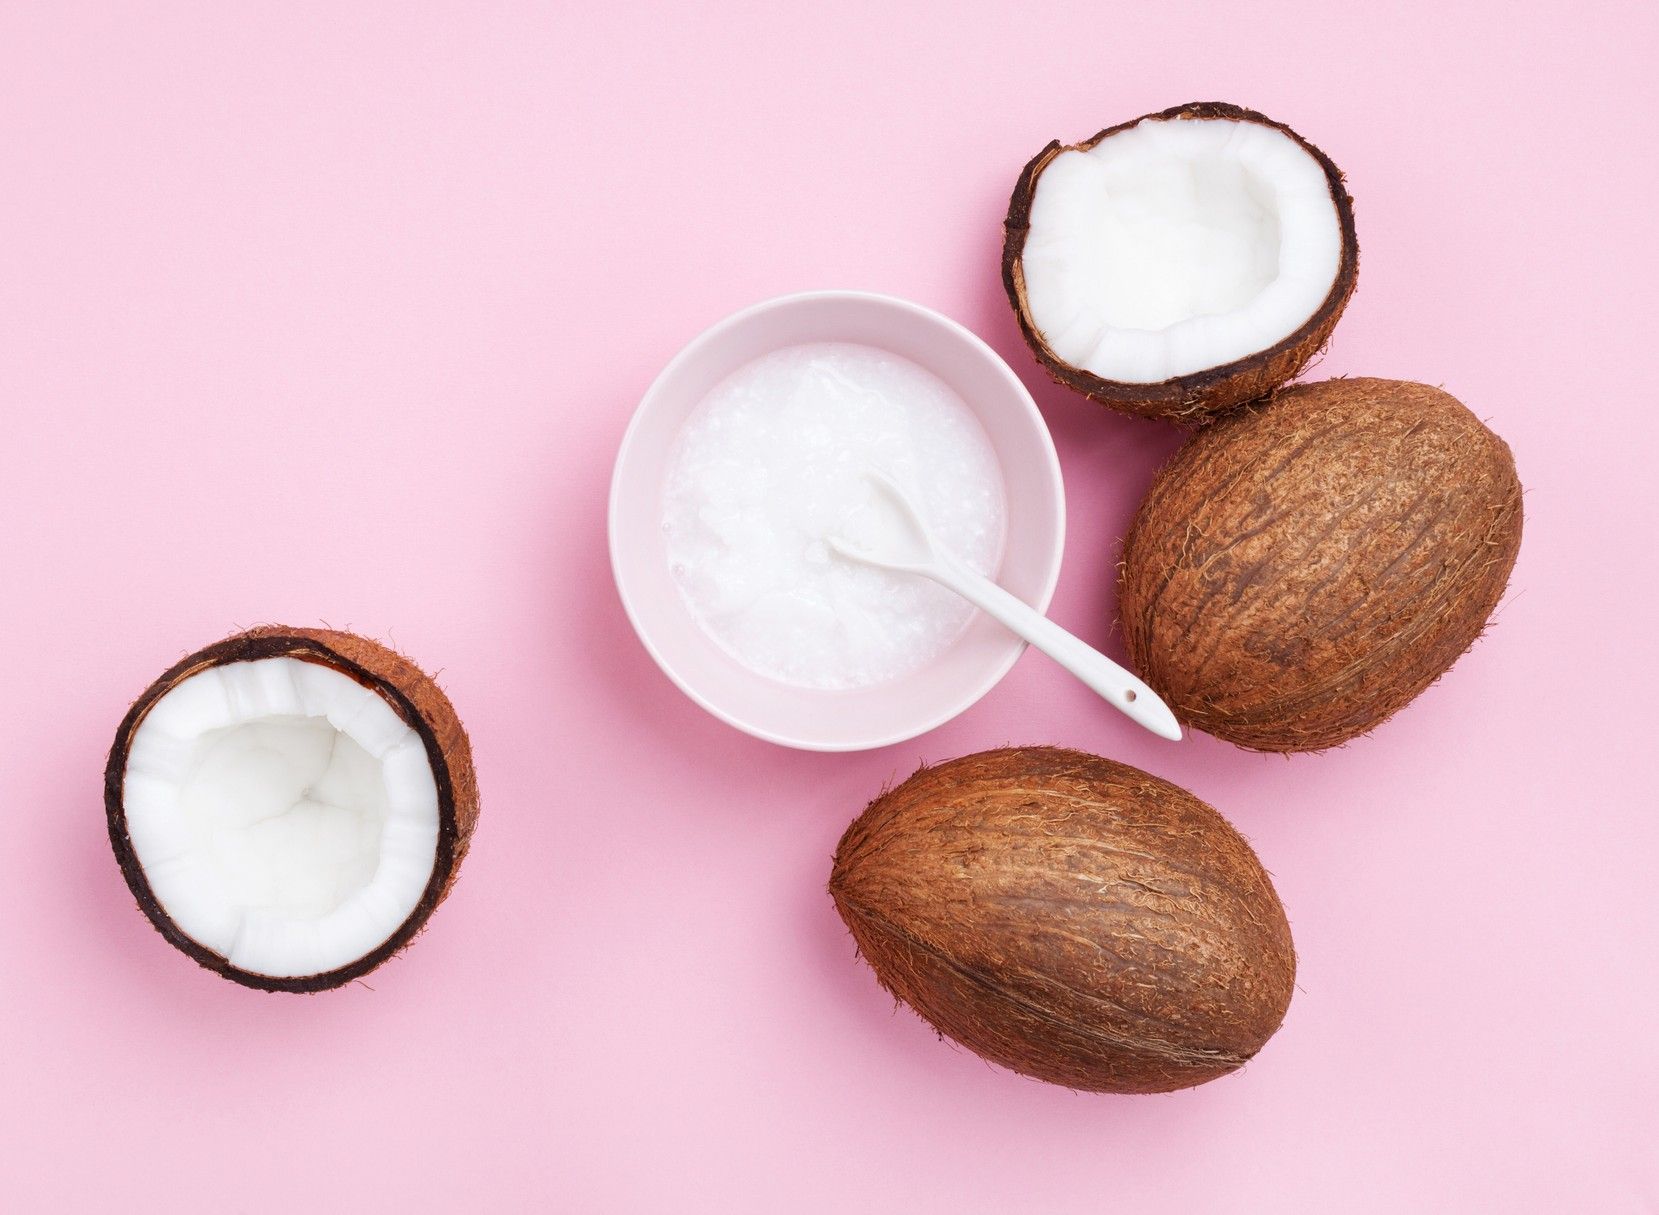 Is coconut oil all it's cracked up to be?